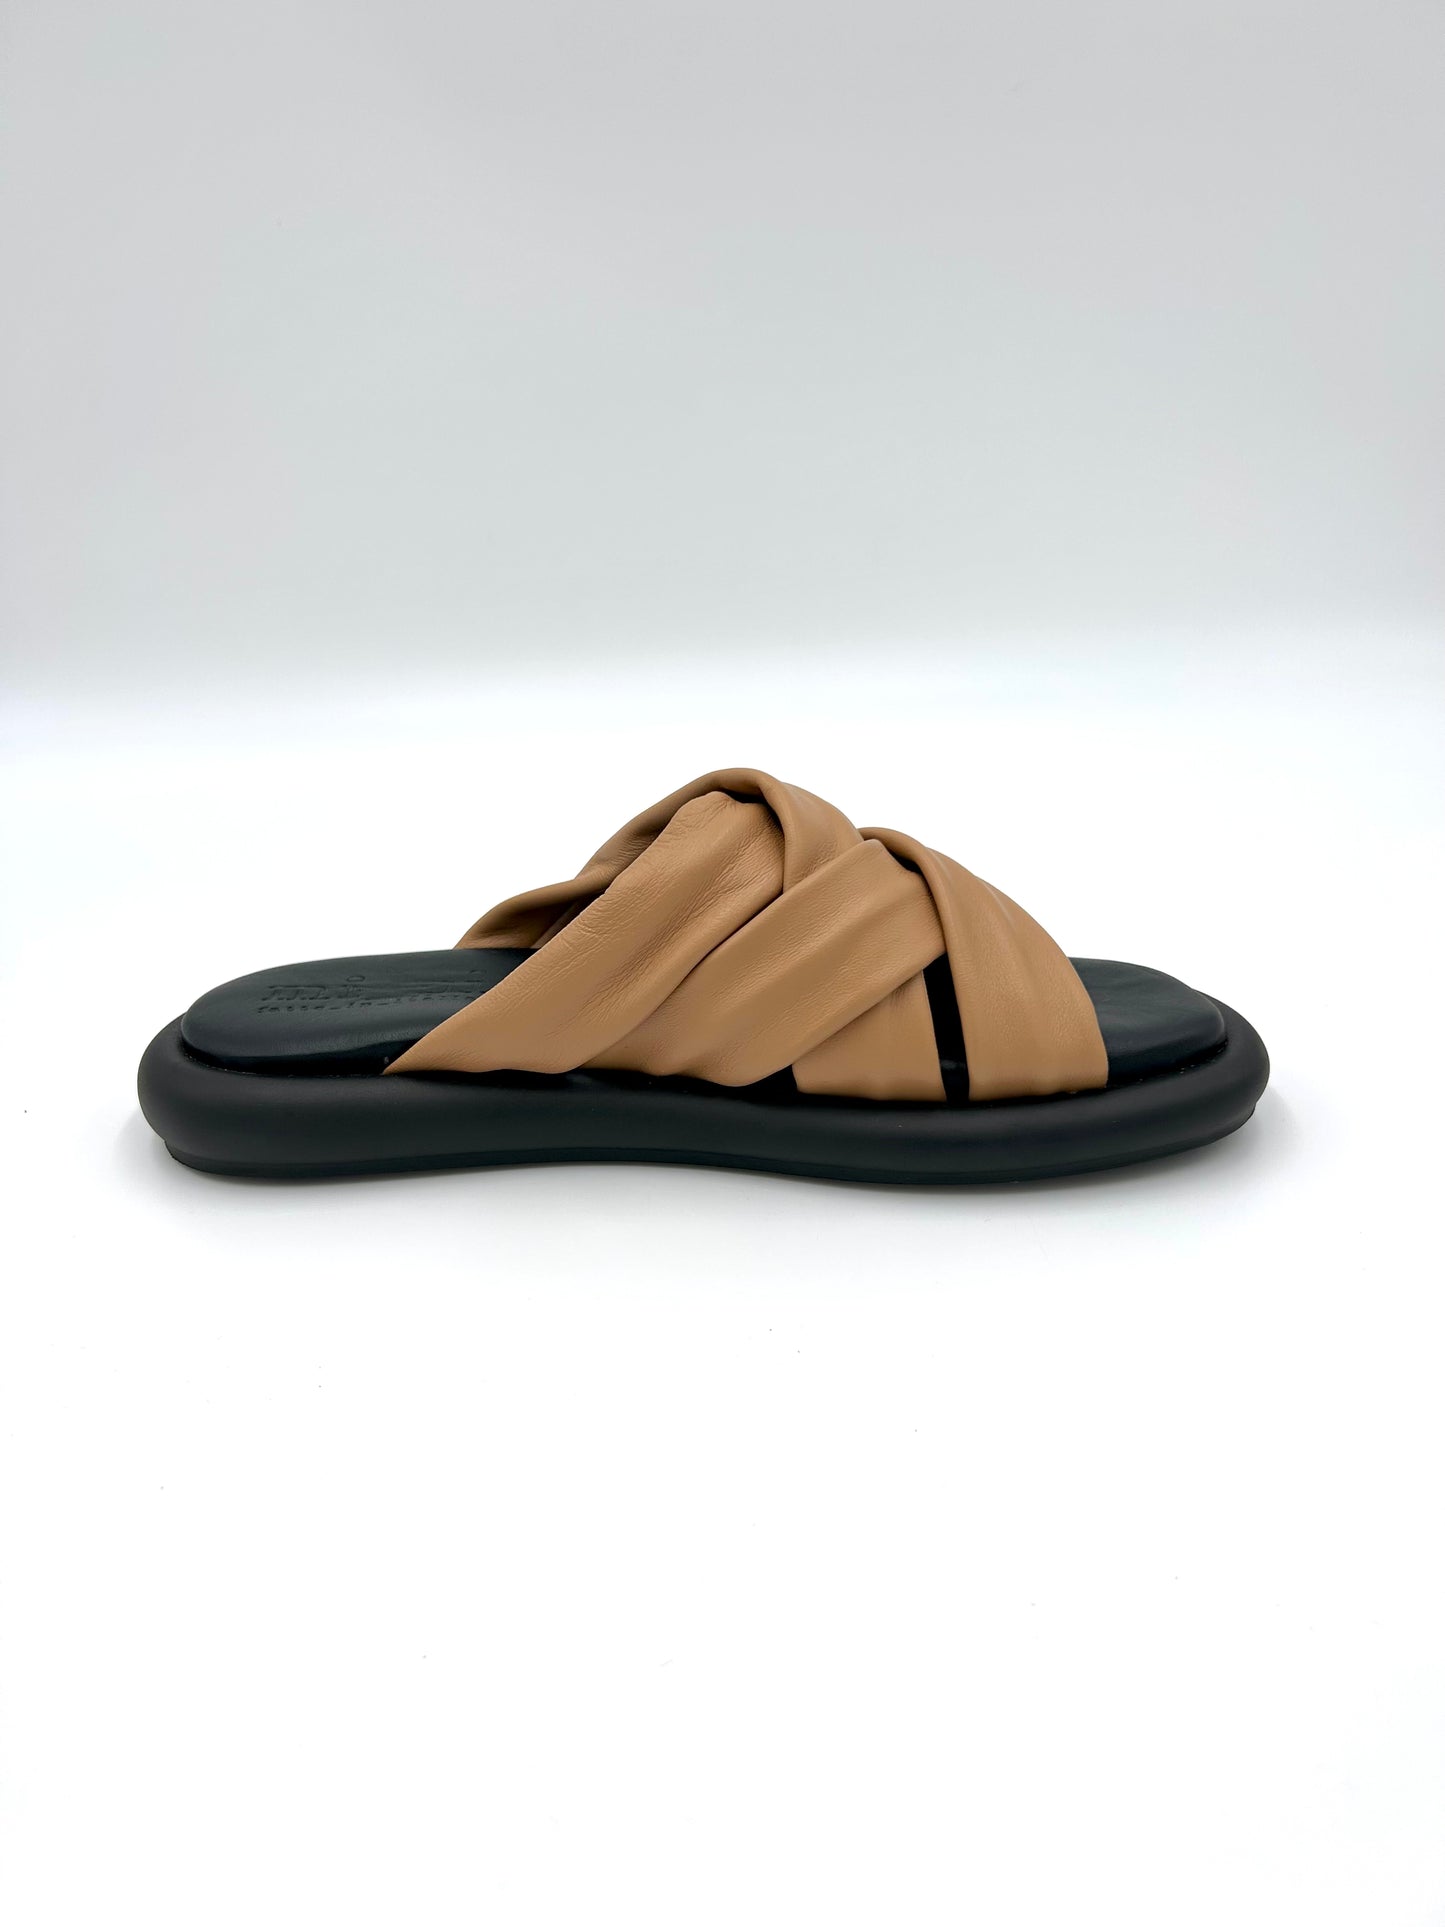 Made in italy Sandalo Mood natural tan modello fascette - in pelle marrone (memory foam) - Made in Italy